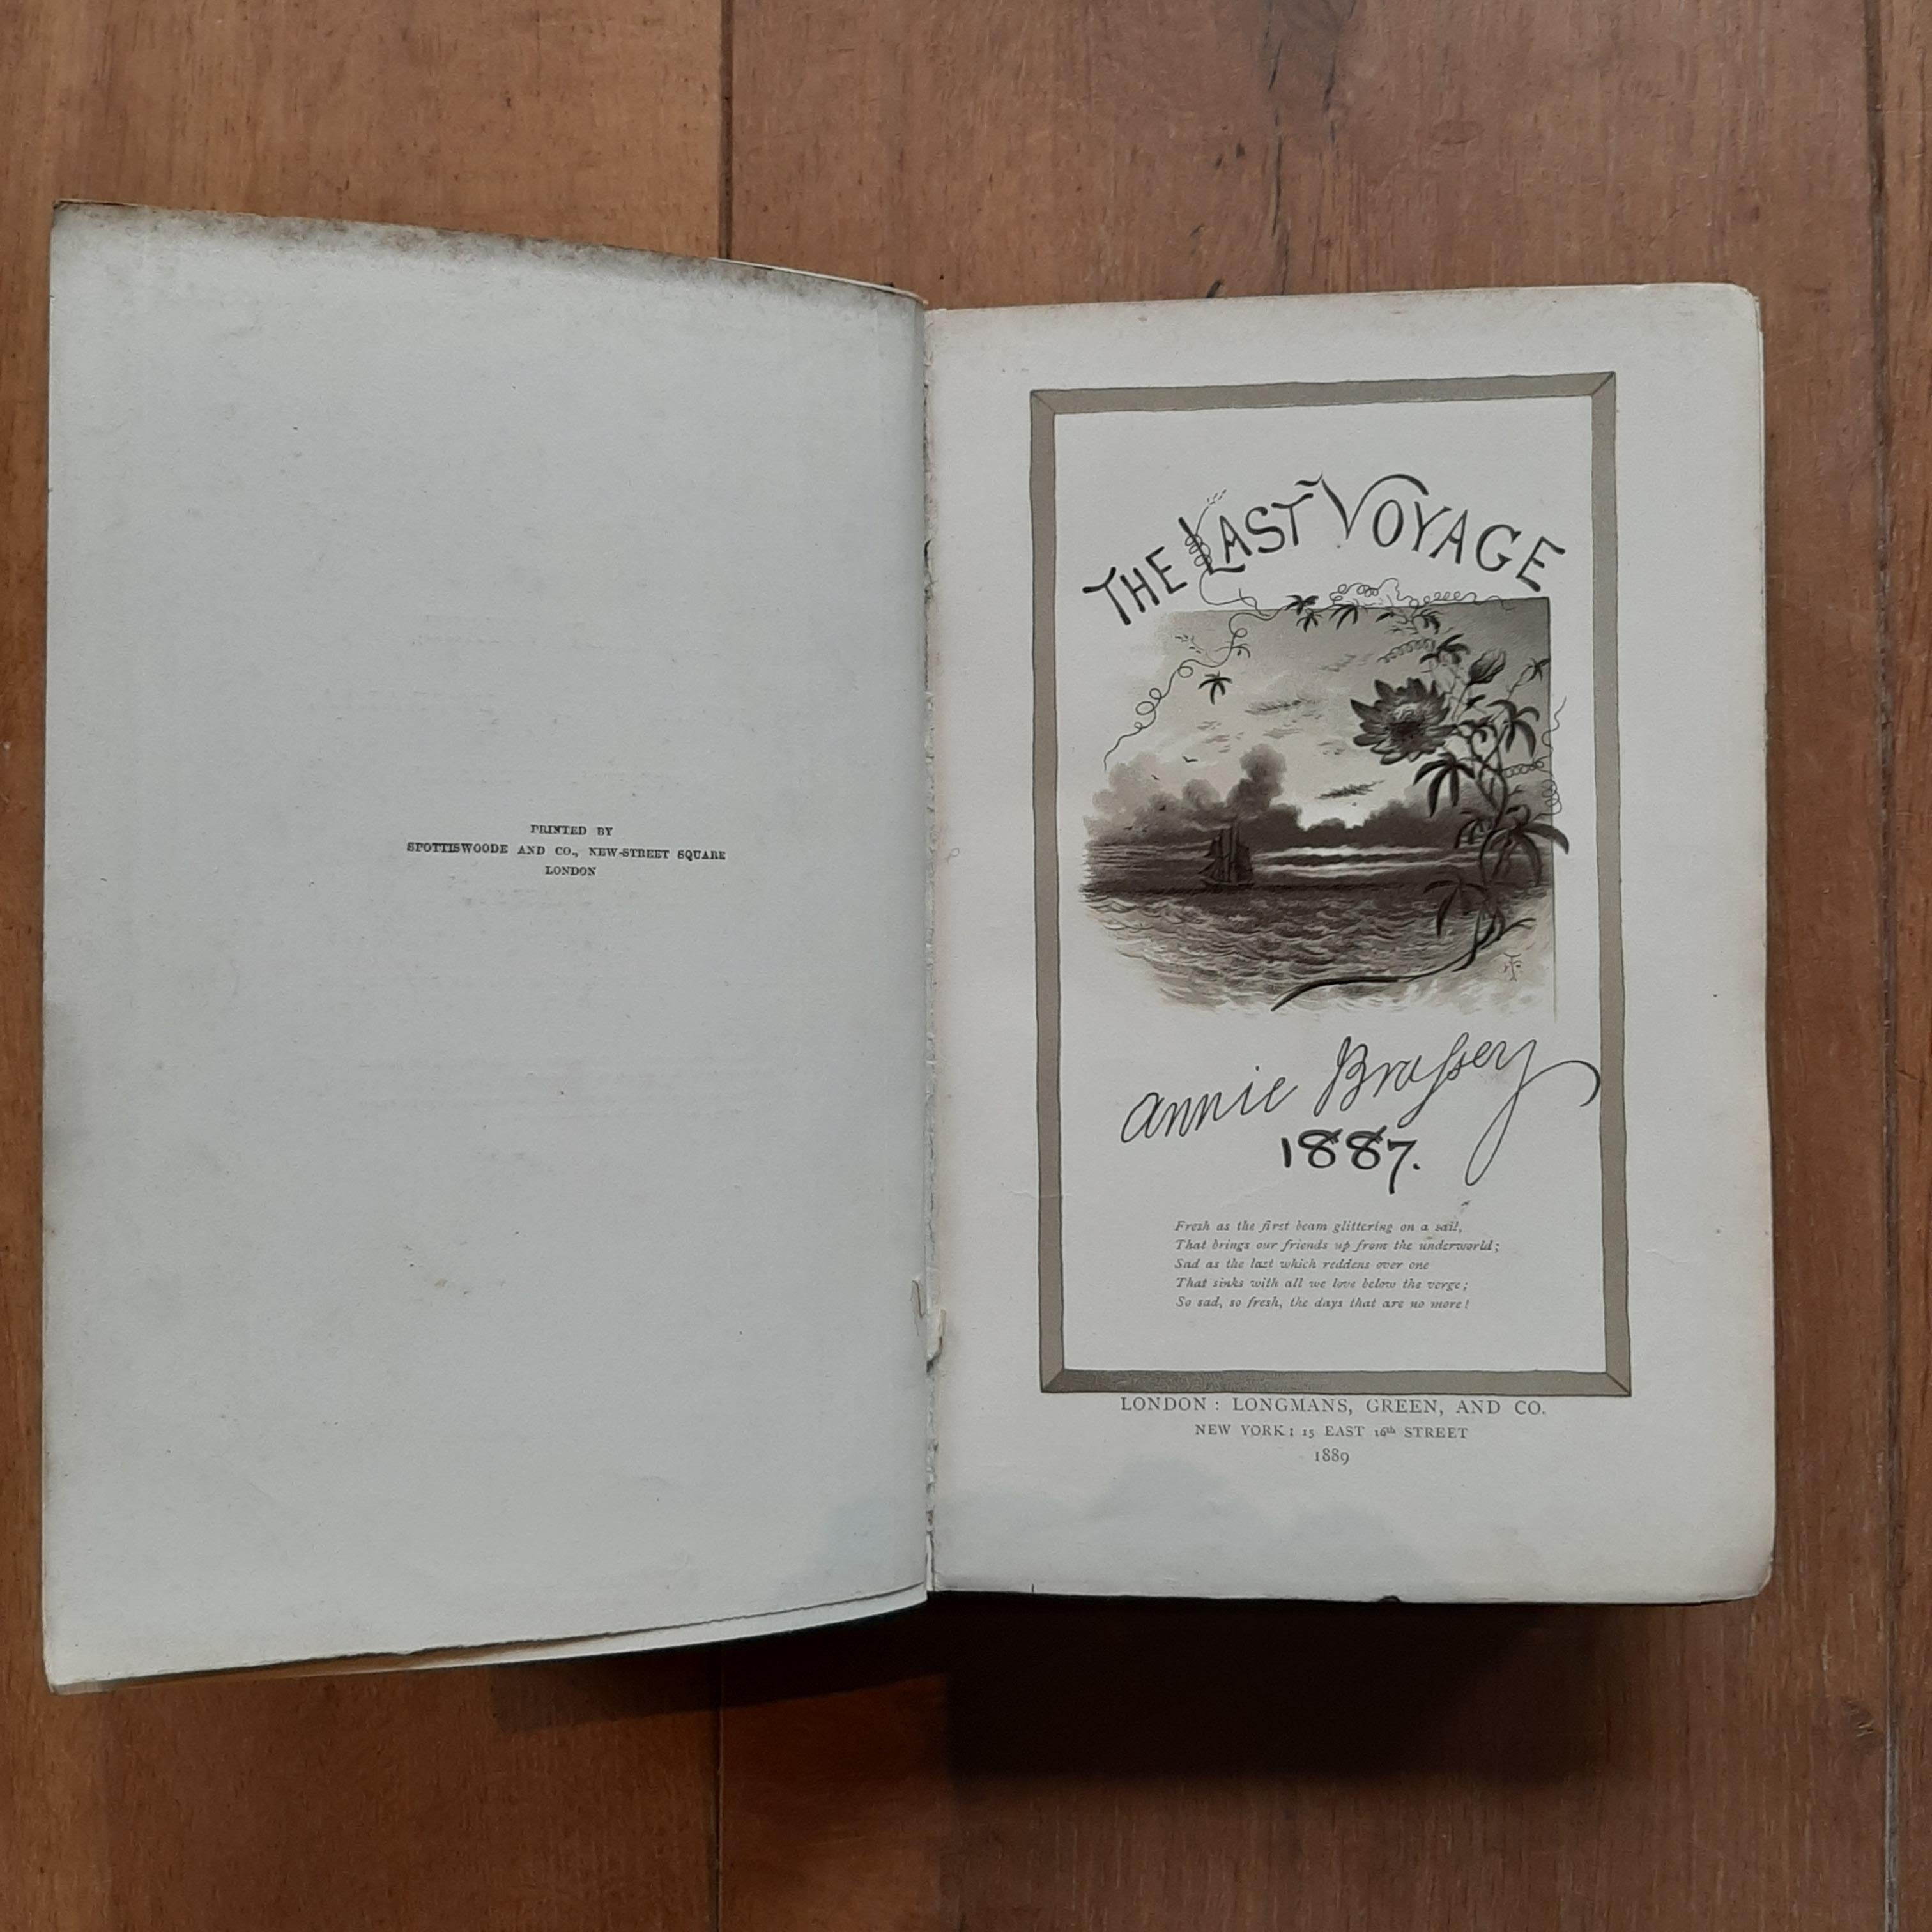 'The Last Voyage, to India and Australia, in the Sunbeam' by the late Lady Brassey. Illustrated by R.T. Pritchett and from photographs. Published 1889. Hardboard cover in original blue cloth. Library sticker on front. Sl. bumped corners. Cover shows